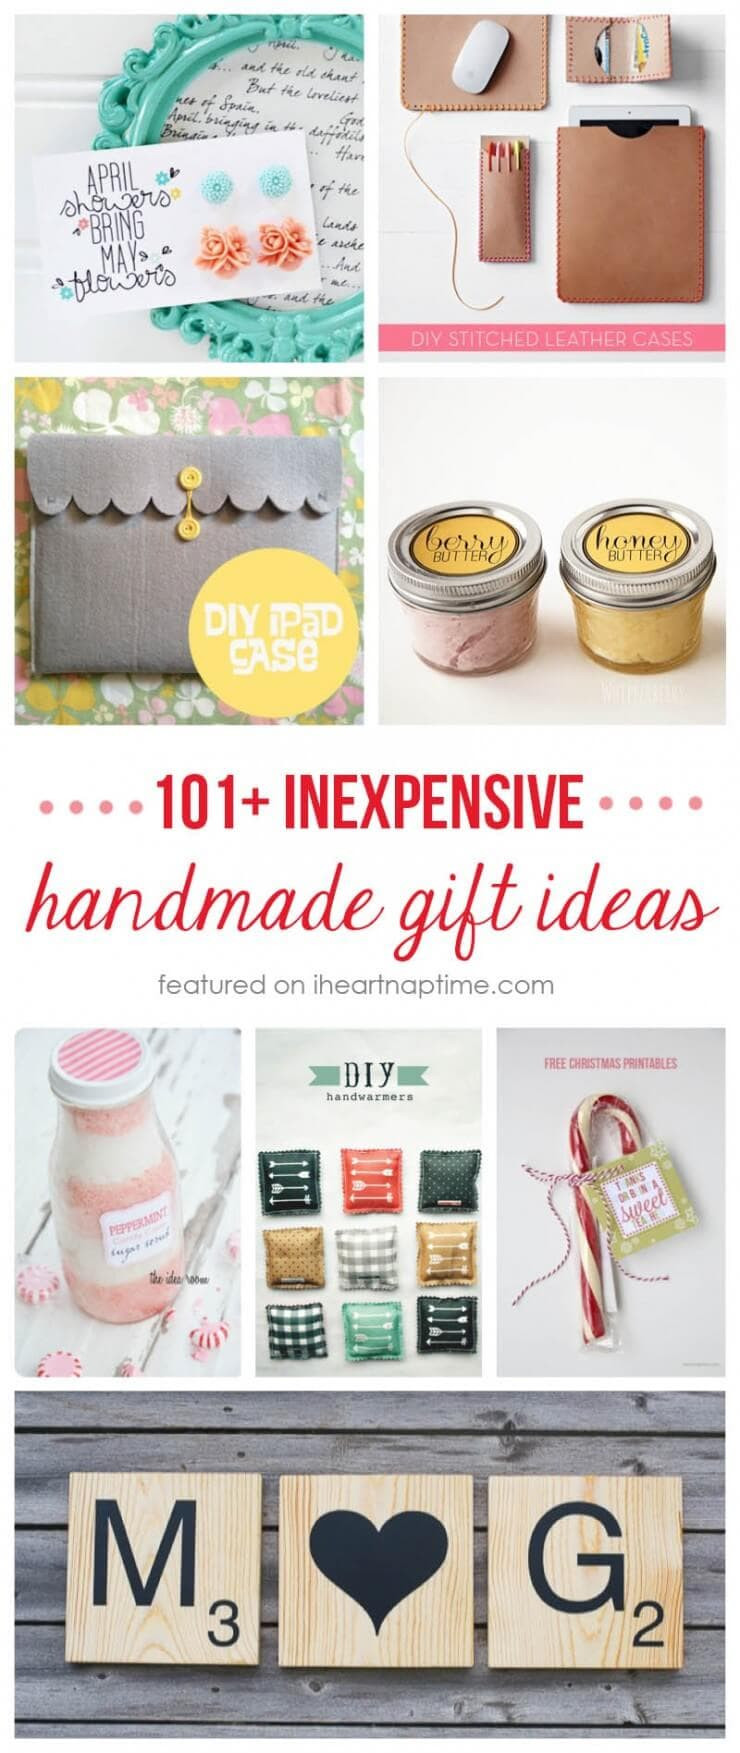 Cheap DIY Gifts
 50 homemade t ideas to make for under $5 I Heart Nap Time